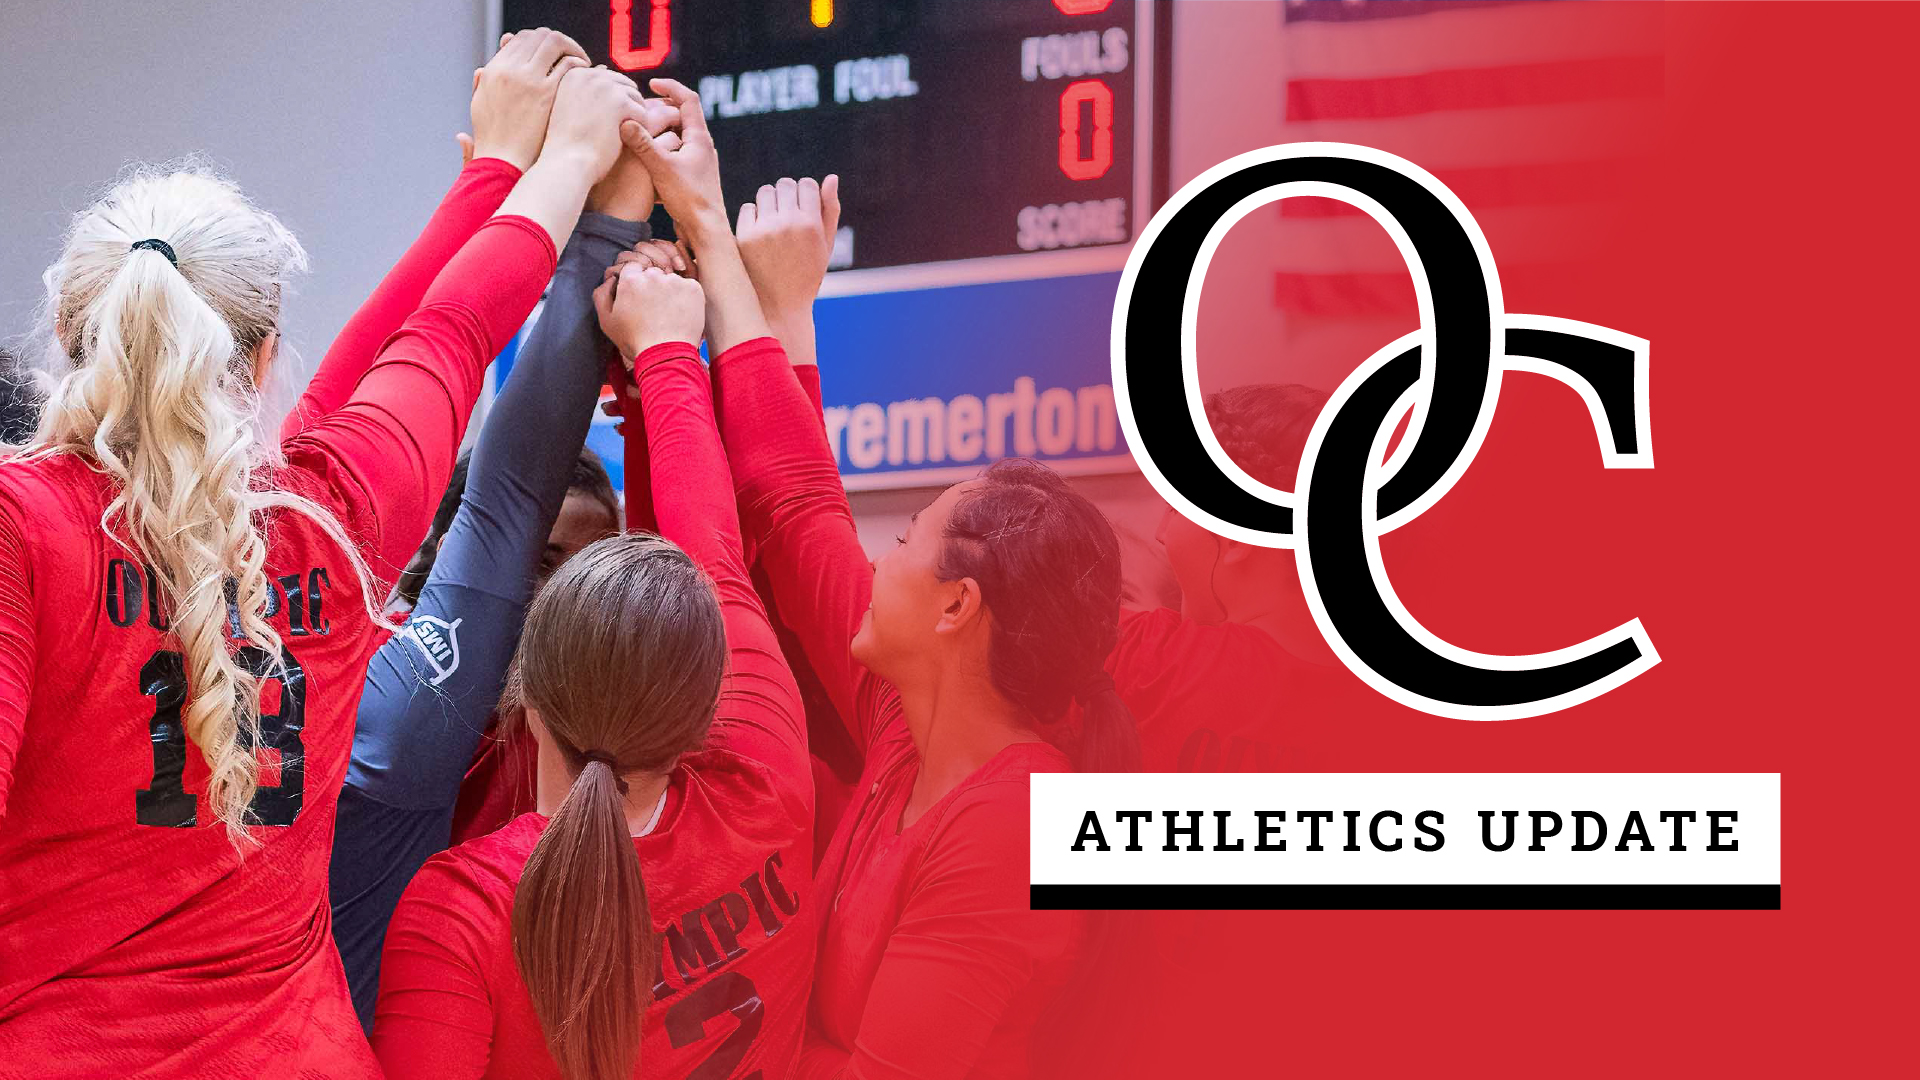 Team of female athletes with arms held high together in a huddle. Image fades to solid red on the right with OC interlocked logo with words athletics update below.